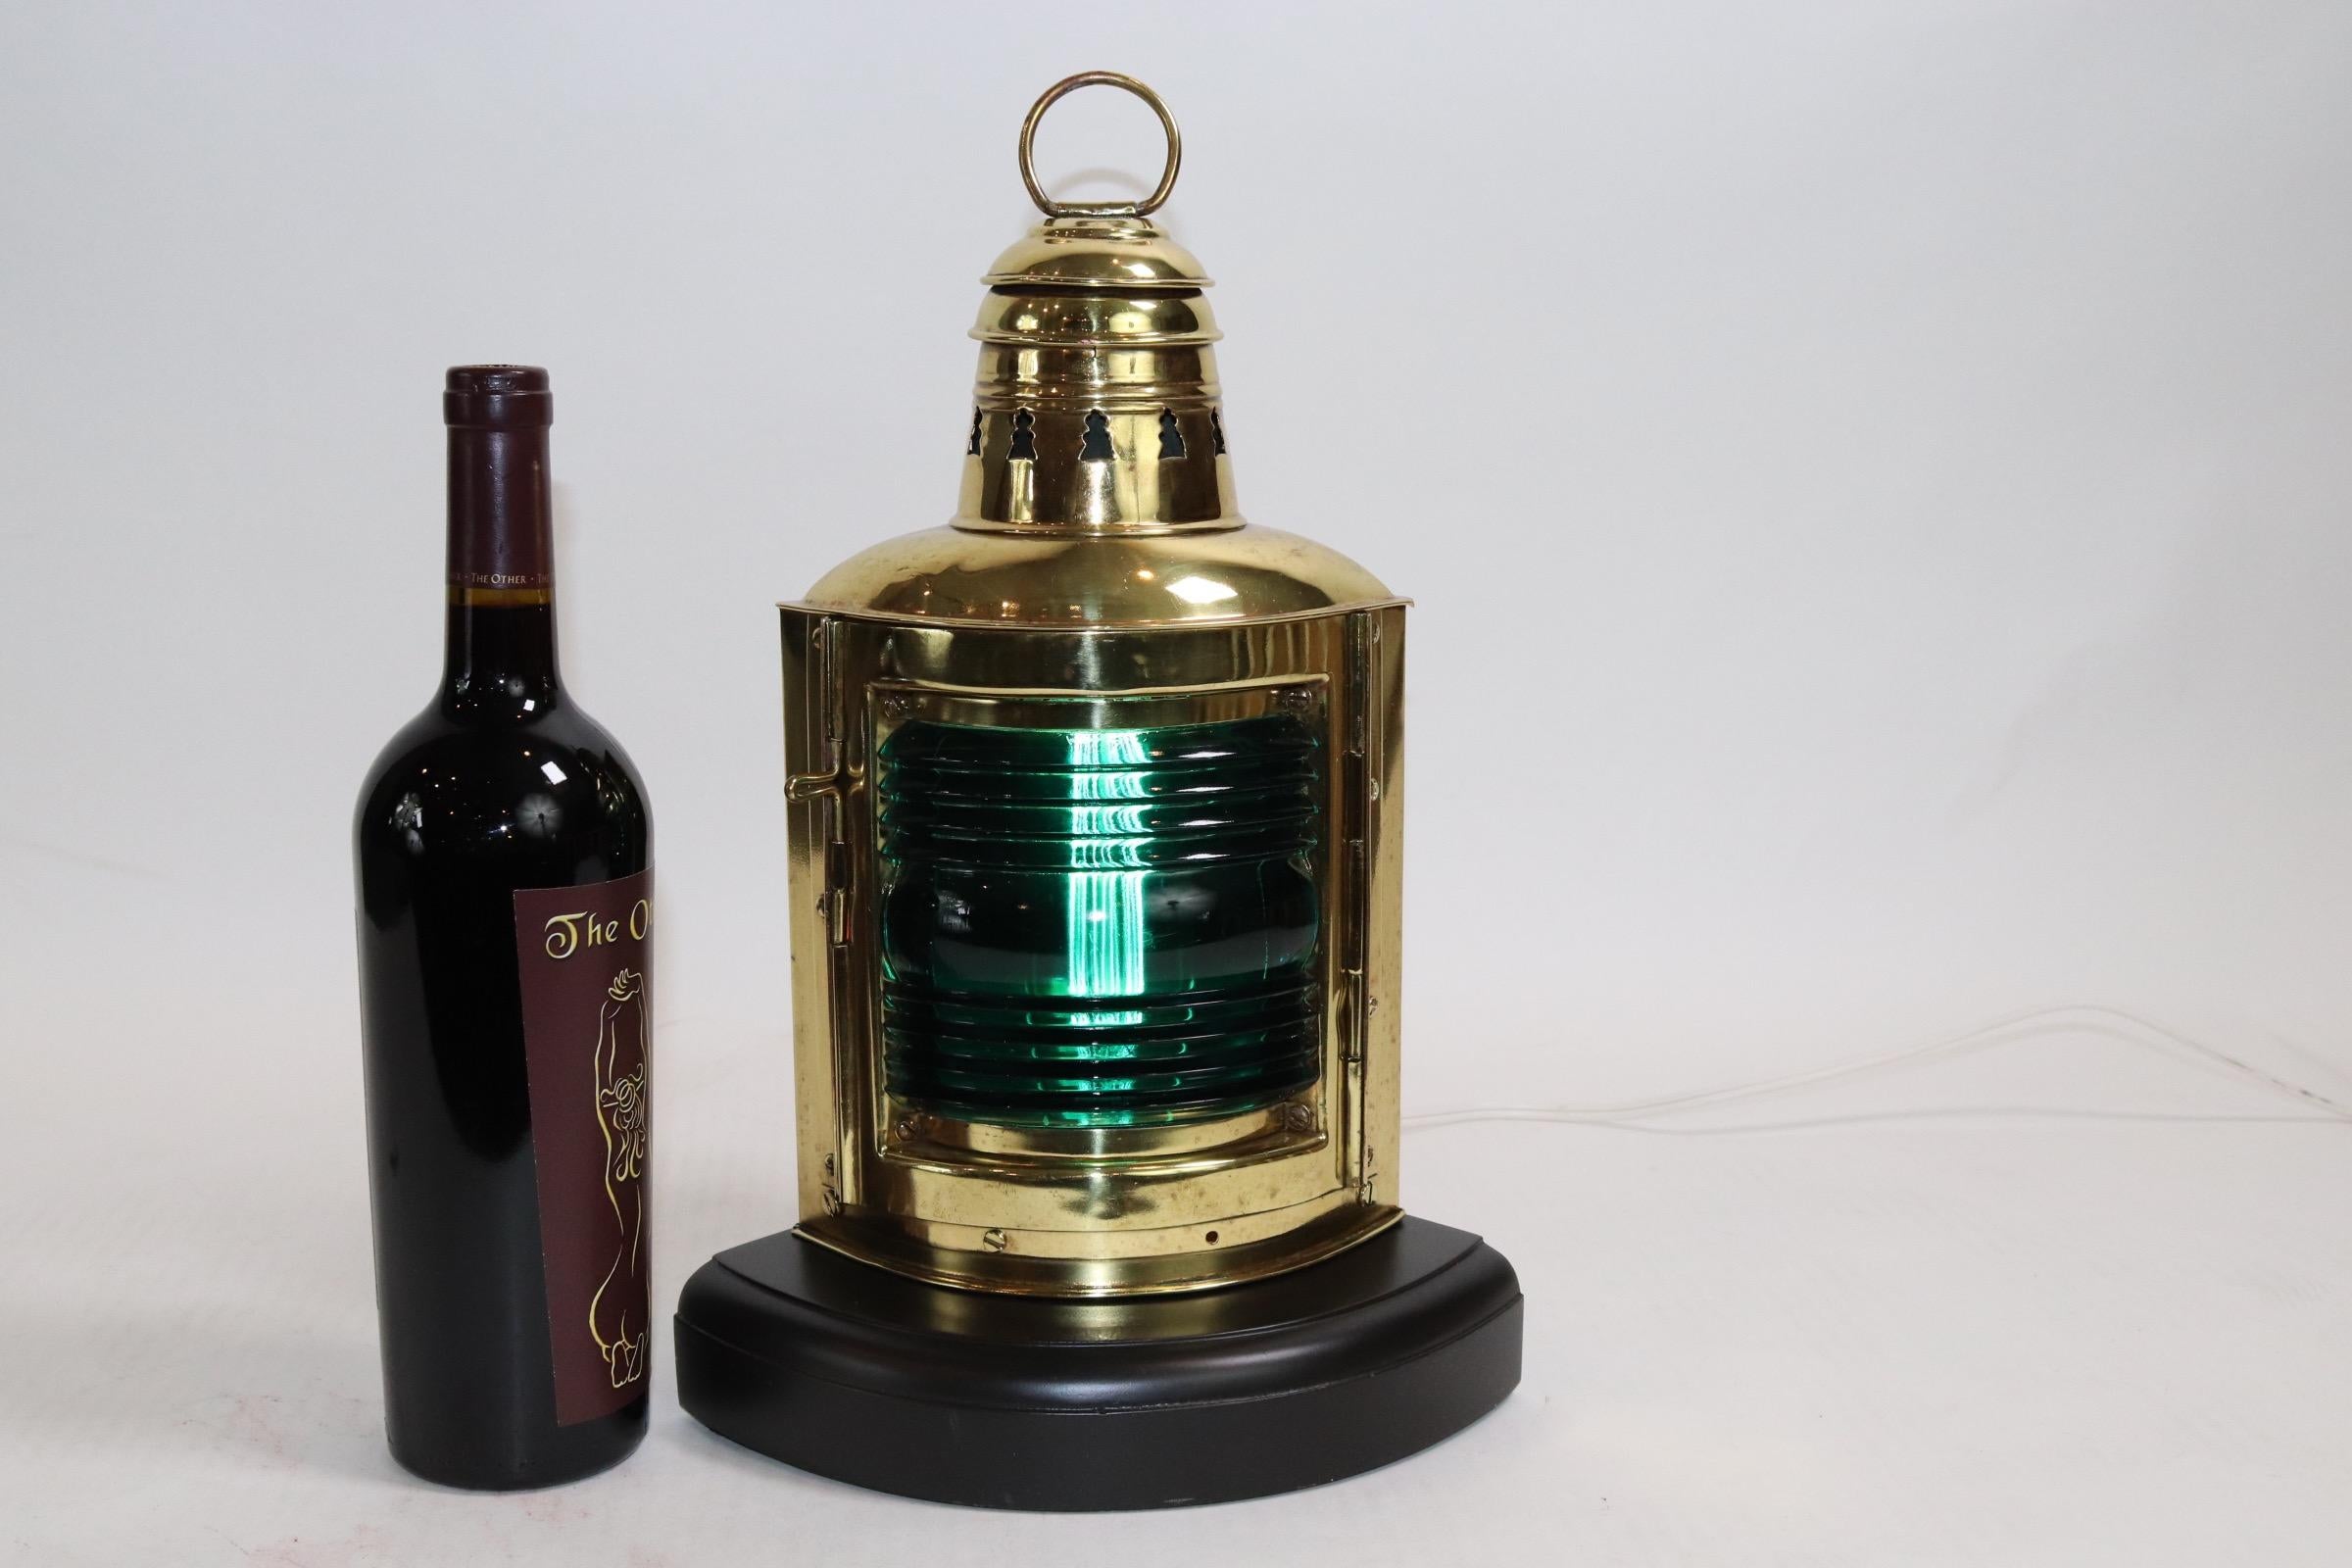 Highly polished solid brass starboard ships lantern with green Fresnel lens. This lantern has makers name Perko embossed on the rear. Mounted onto a thick wood base with electric socket installed for home display. Weight is 5 pounds.